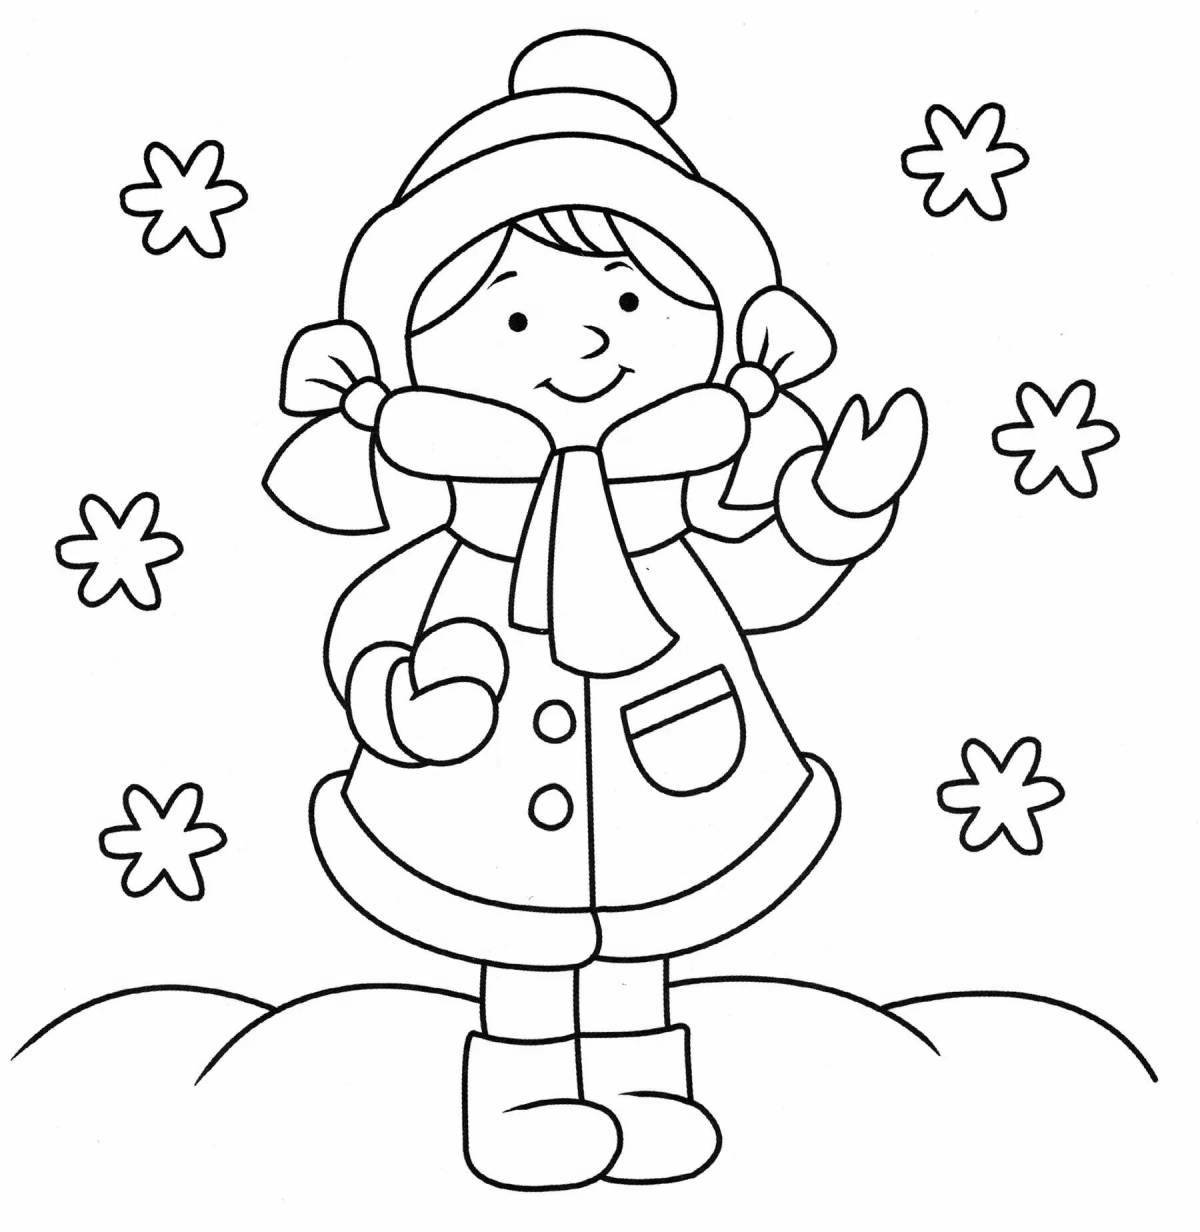 Joyful coloring for children 3-4 years old winter